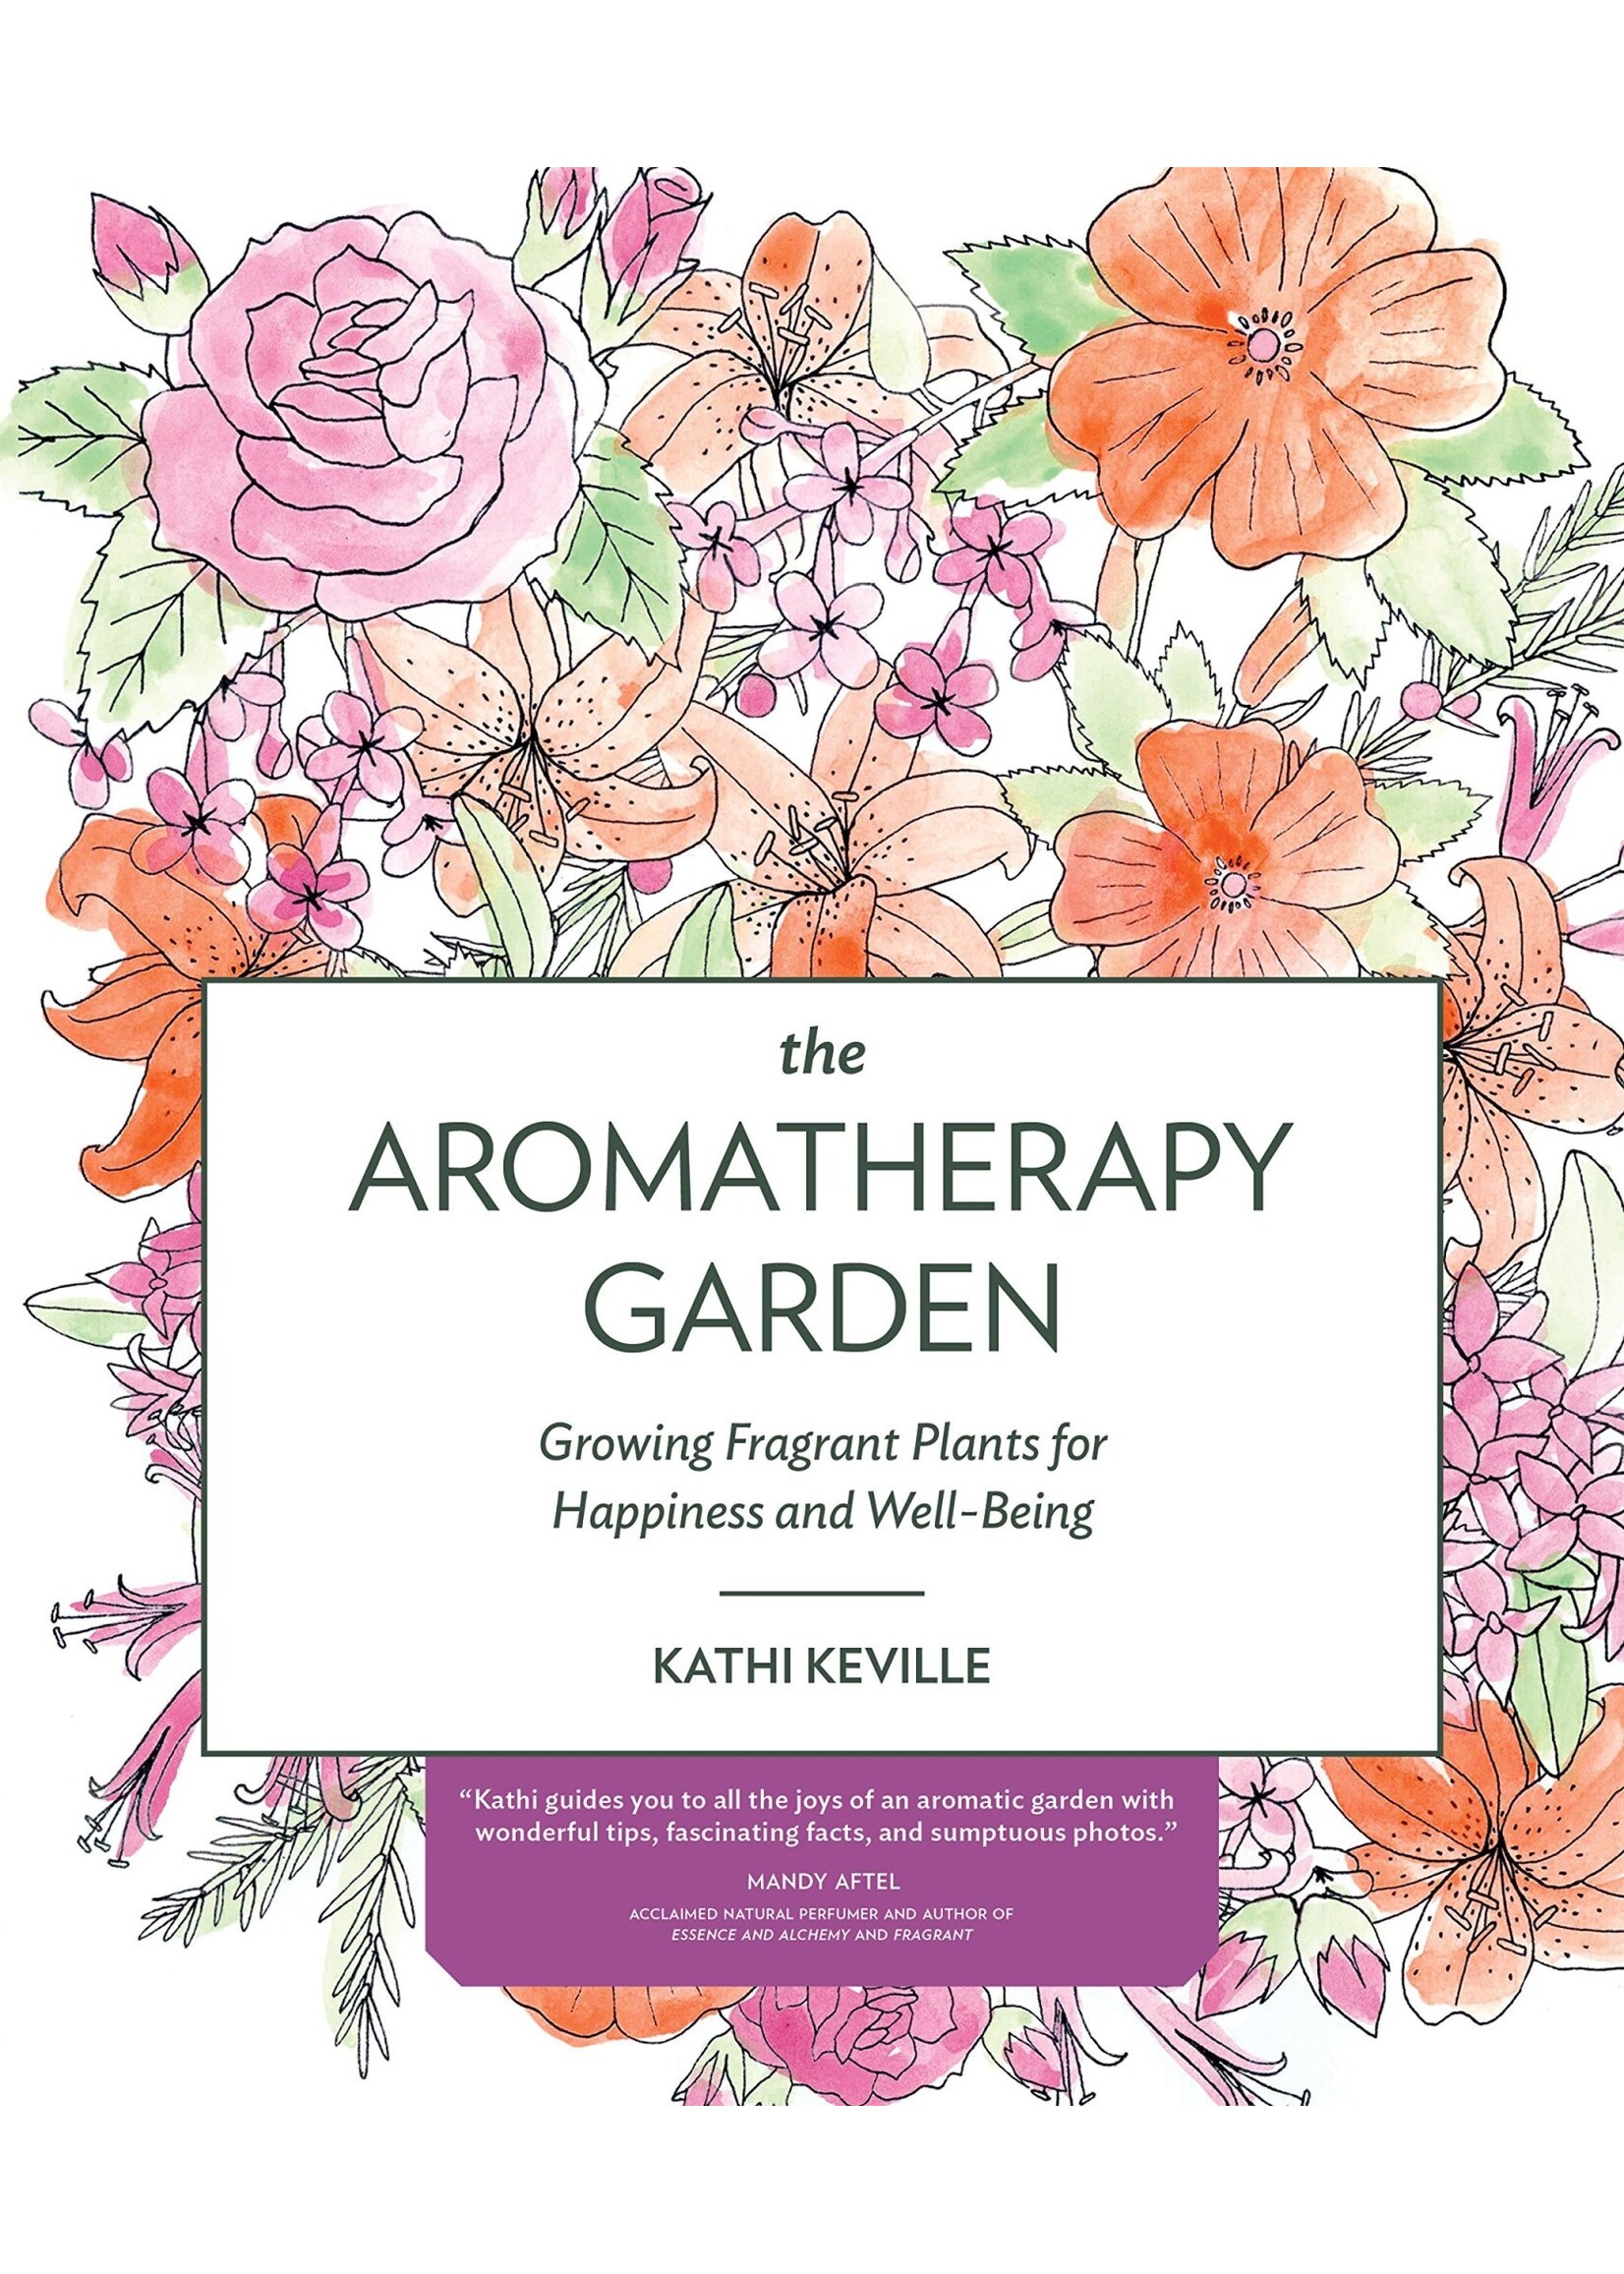 The Aromatherapy Garden by Kathy Keville